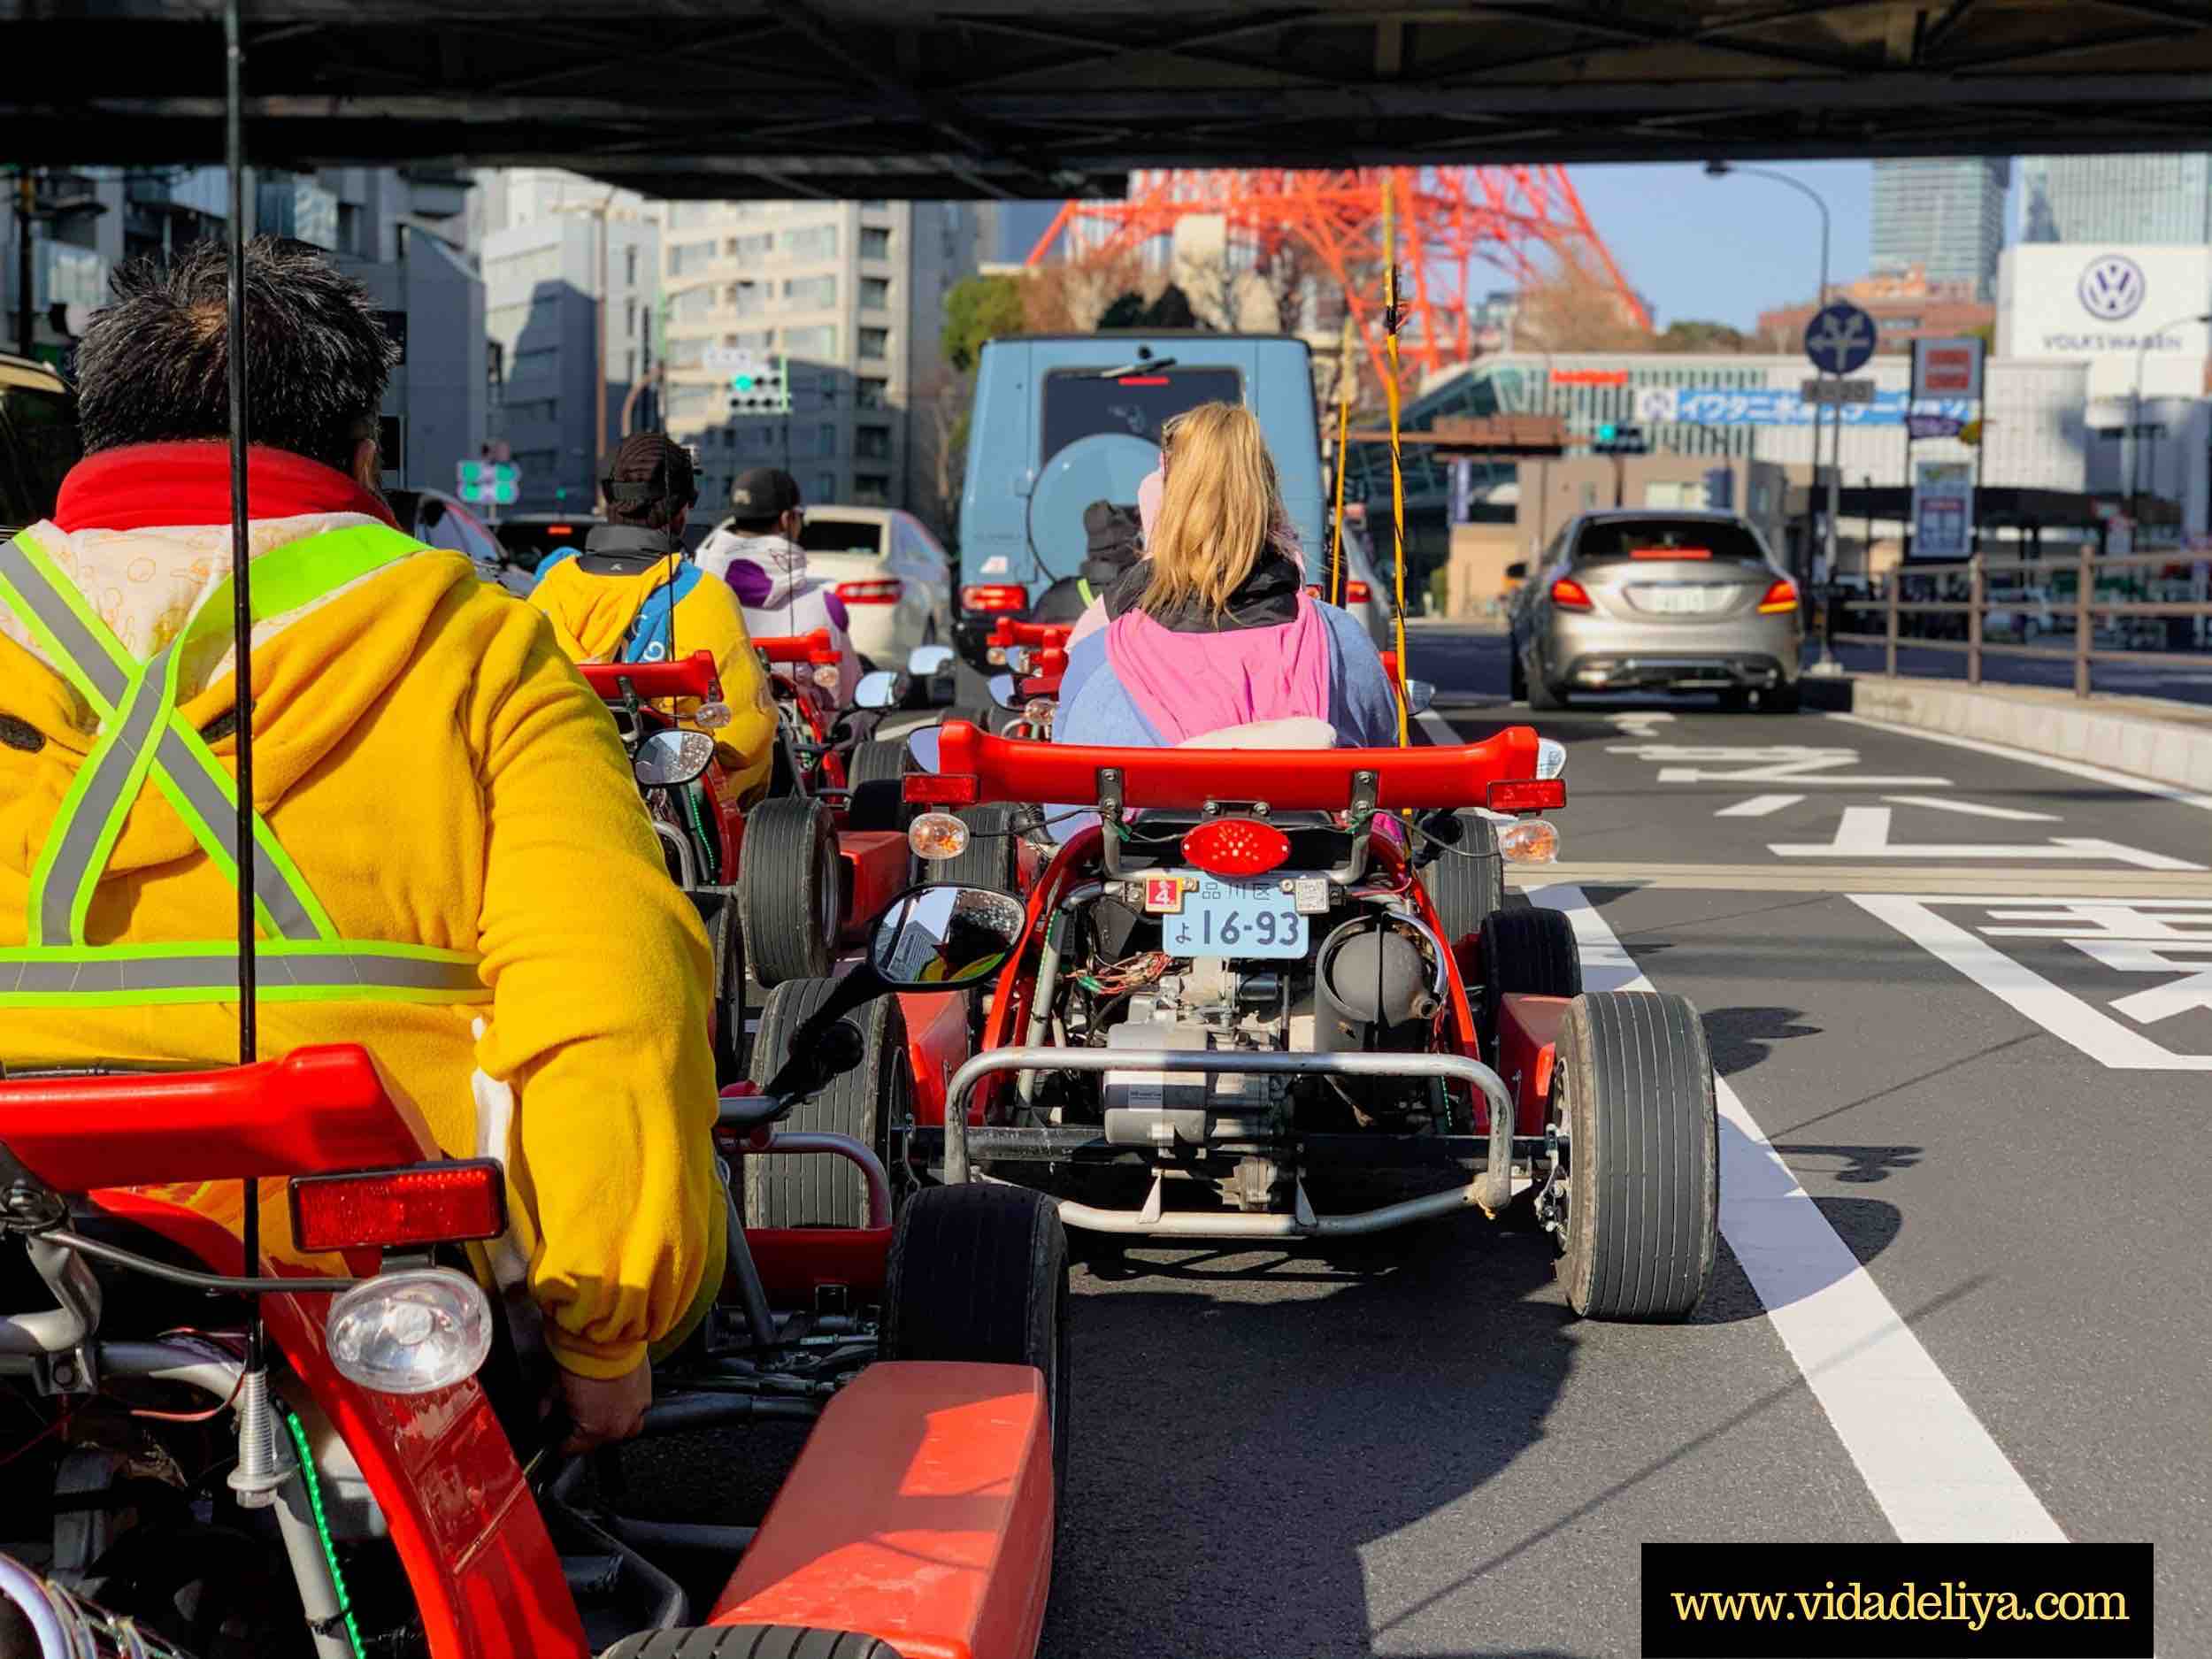 Mario Kart in Tokyo: Everything You Need to Know